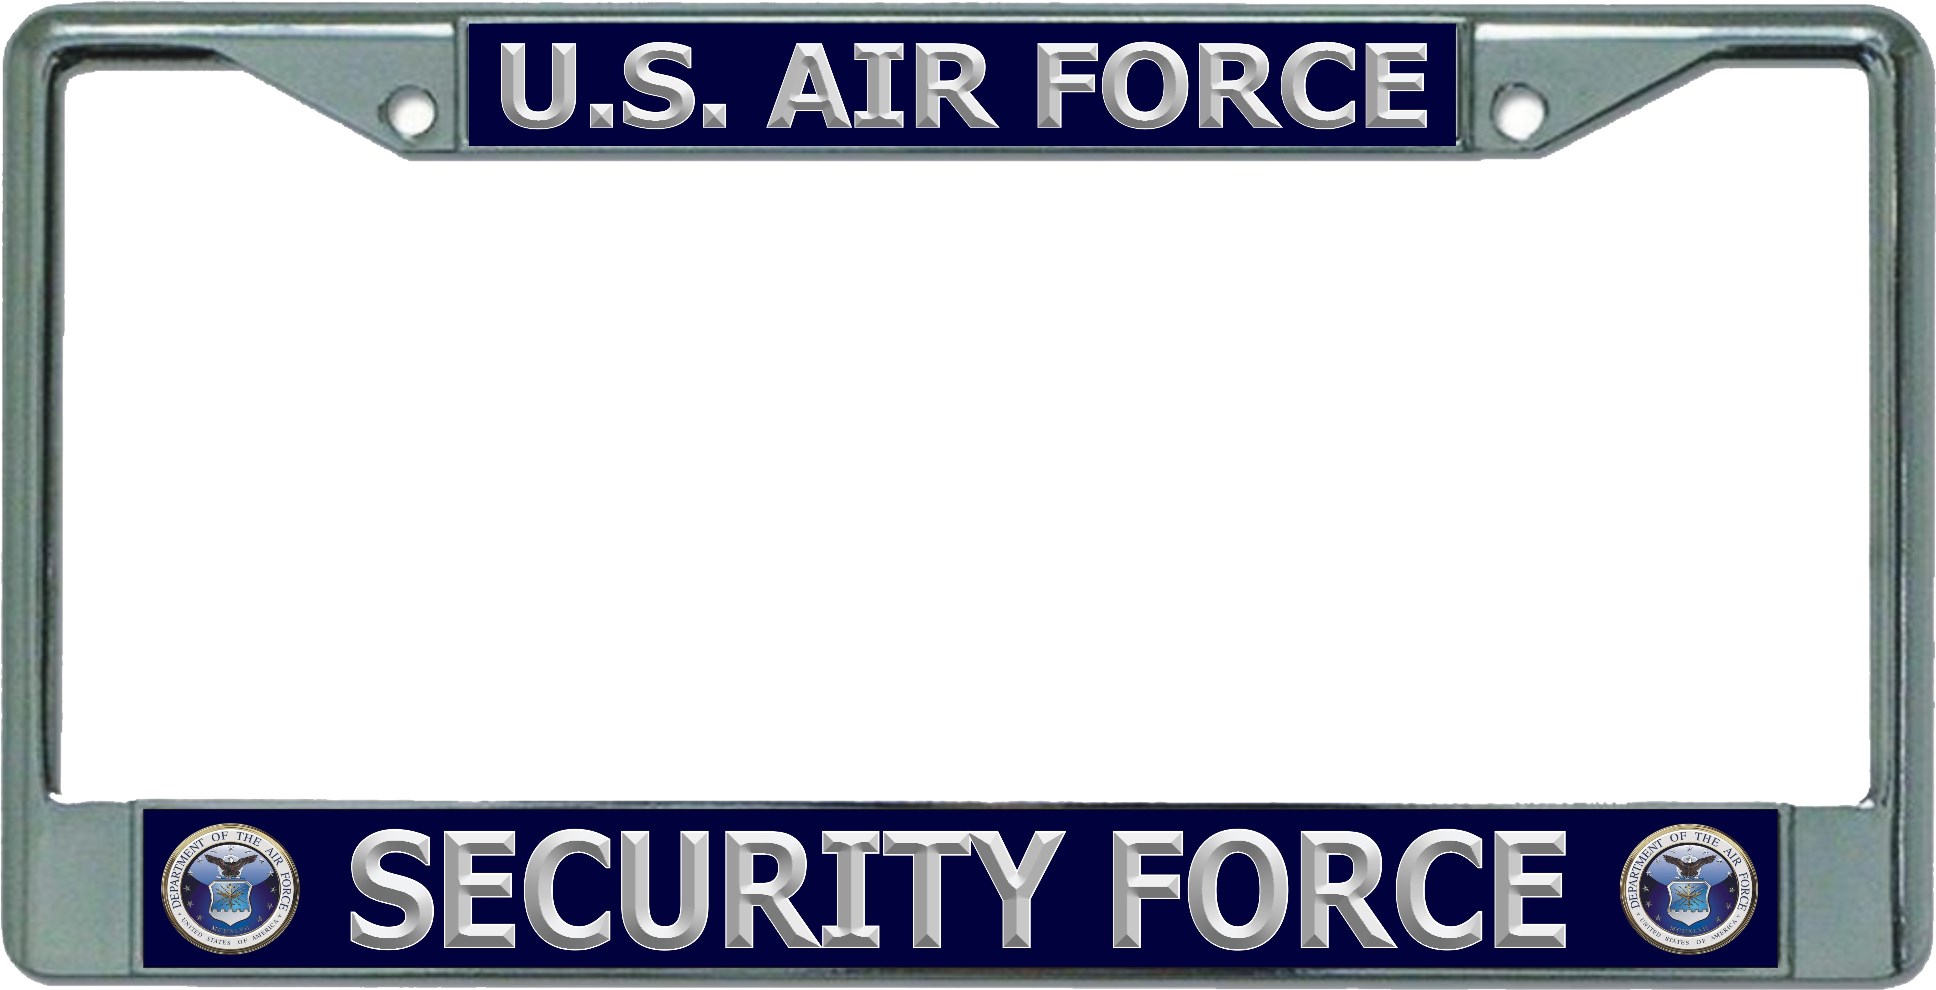 U.S. Air Force Security Force Chrome License Plate FRAME